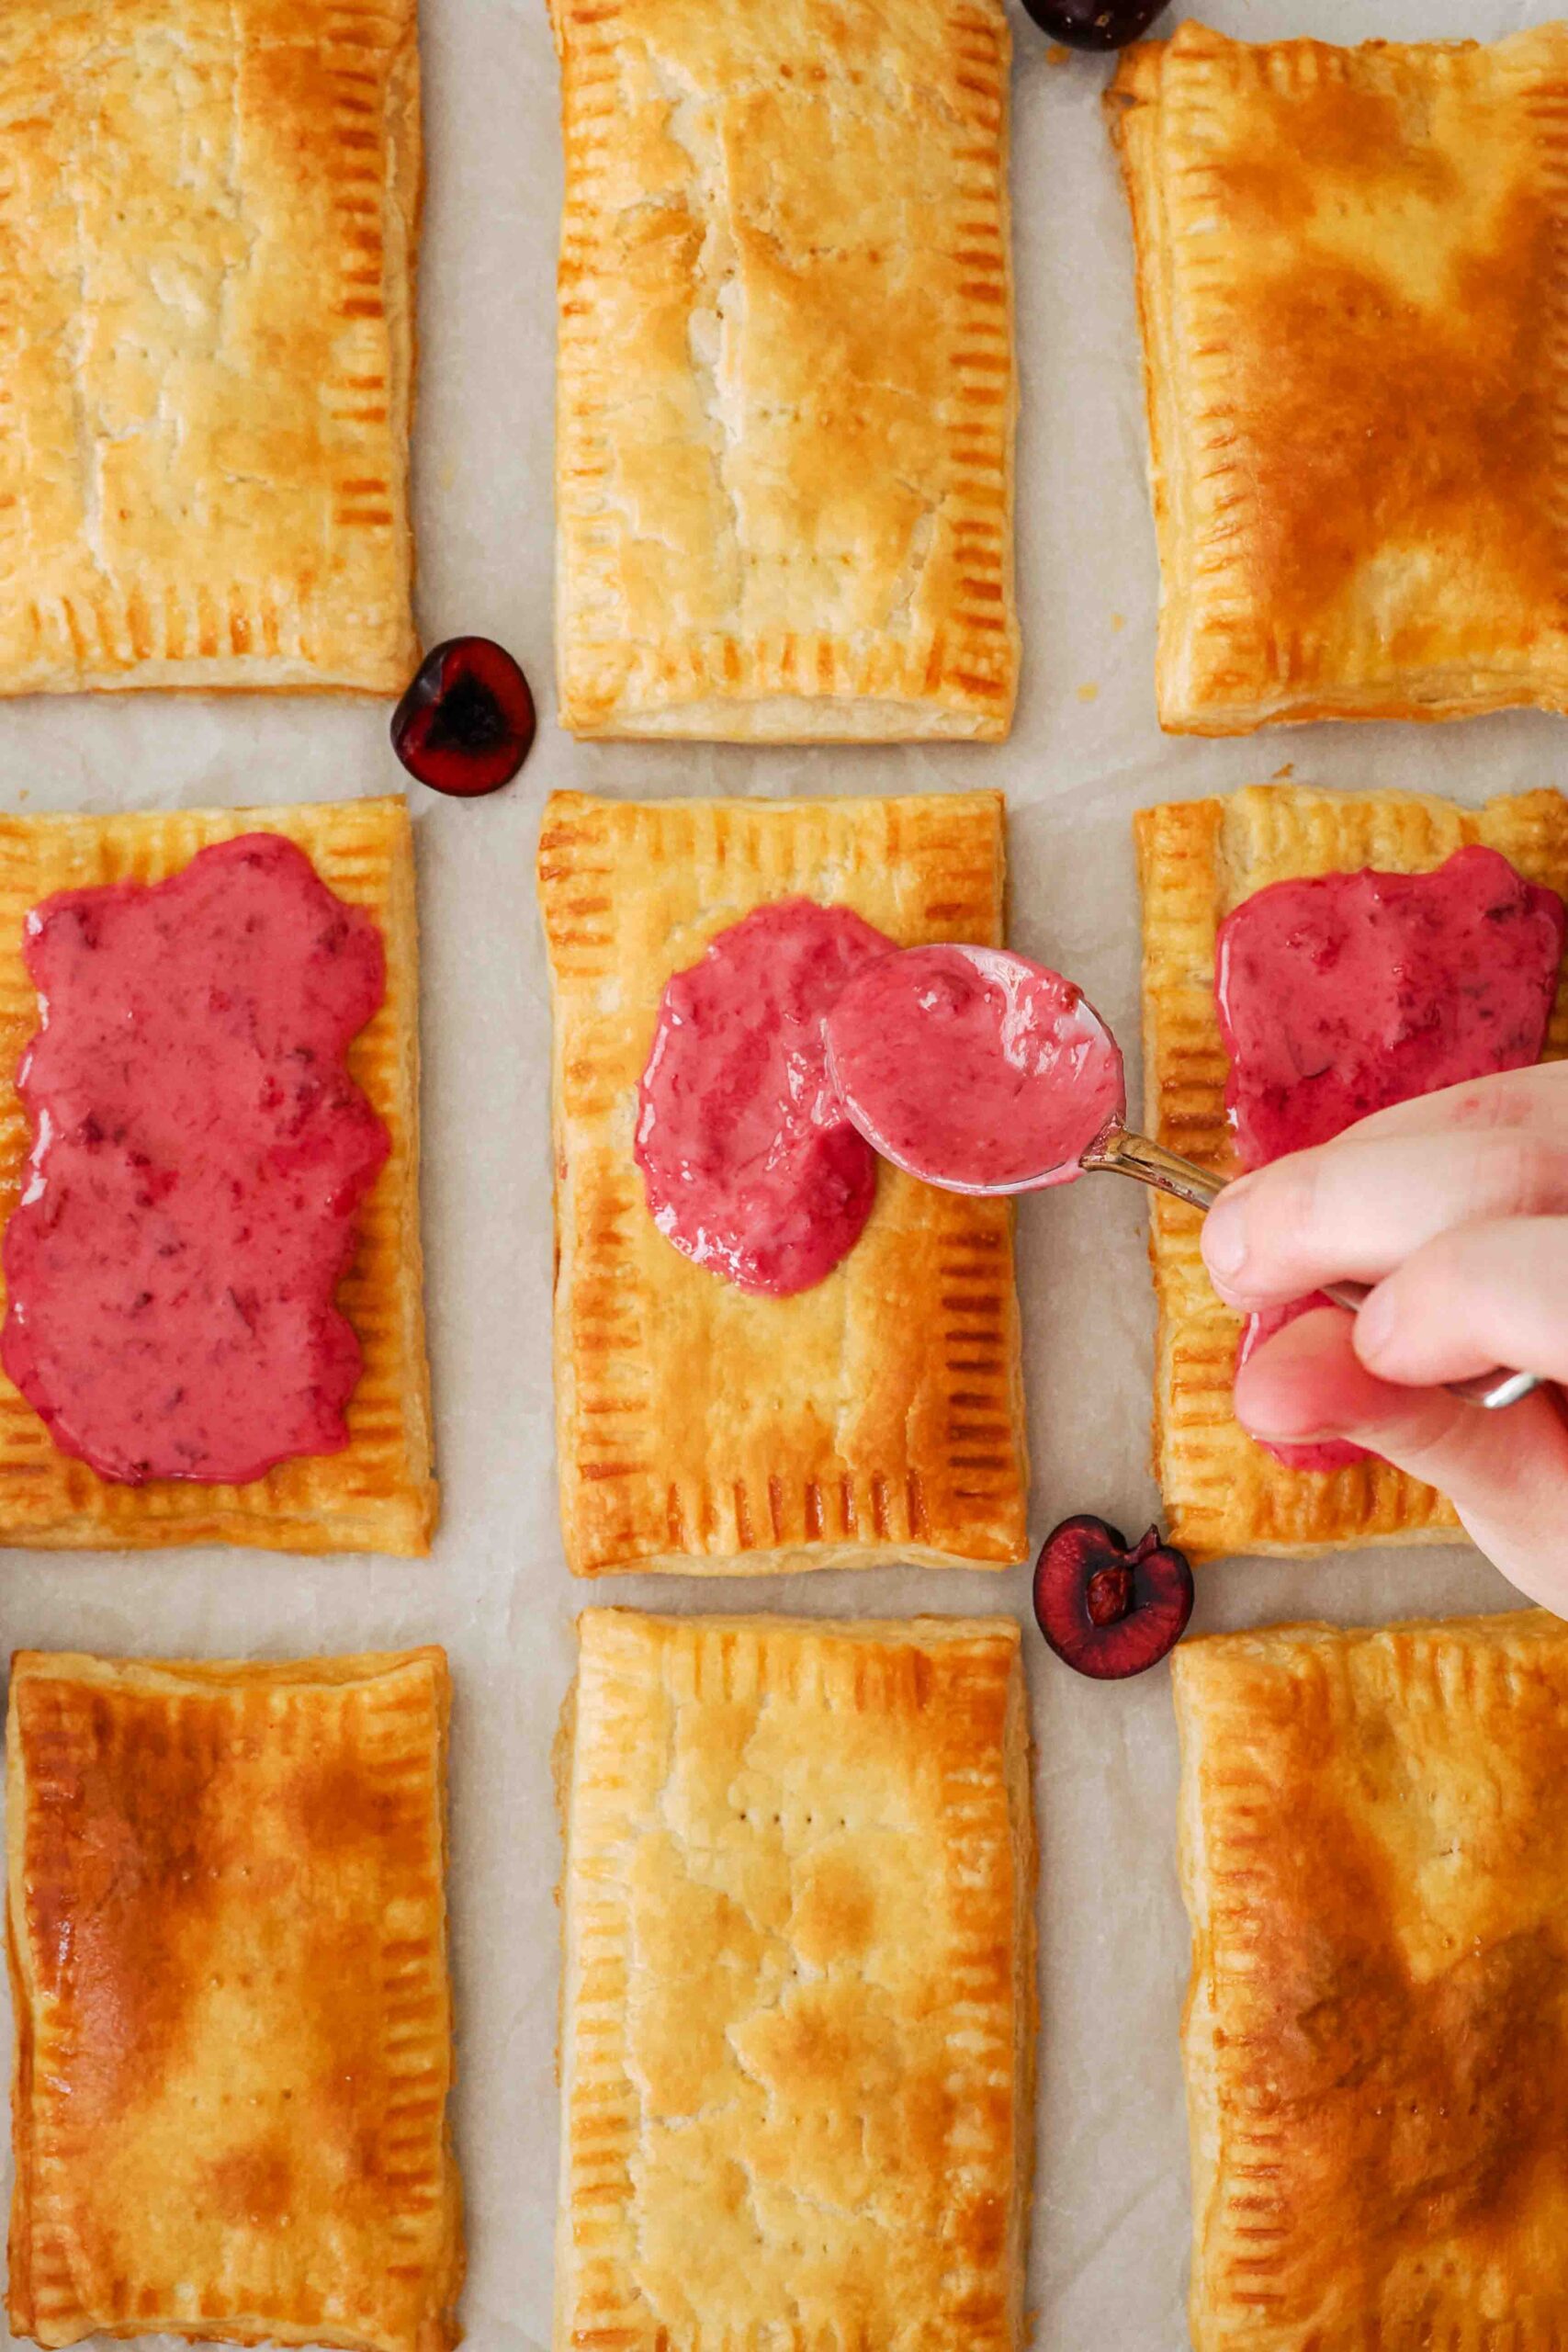 A spoon spreads cherry frosting on homemade cherry pop tarts.